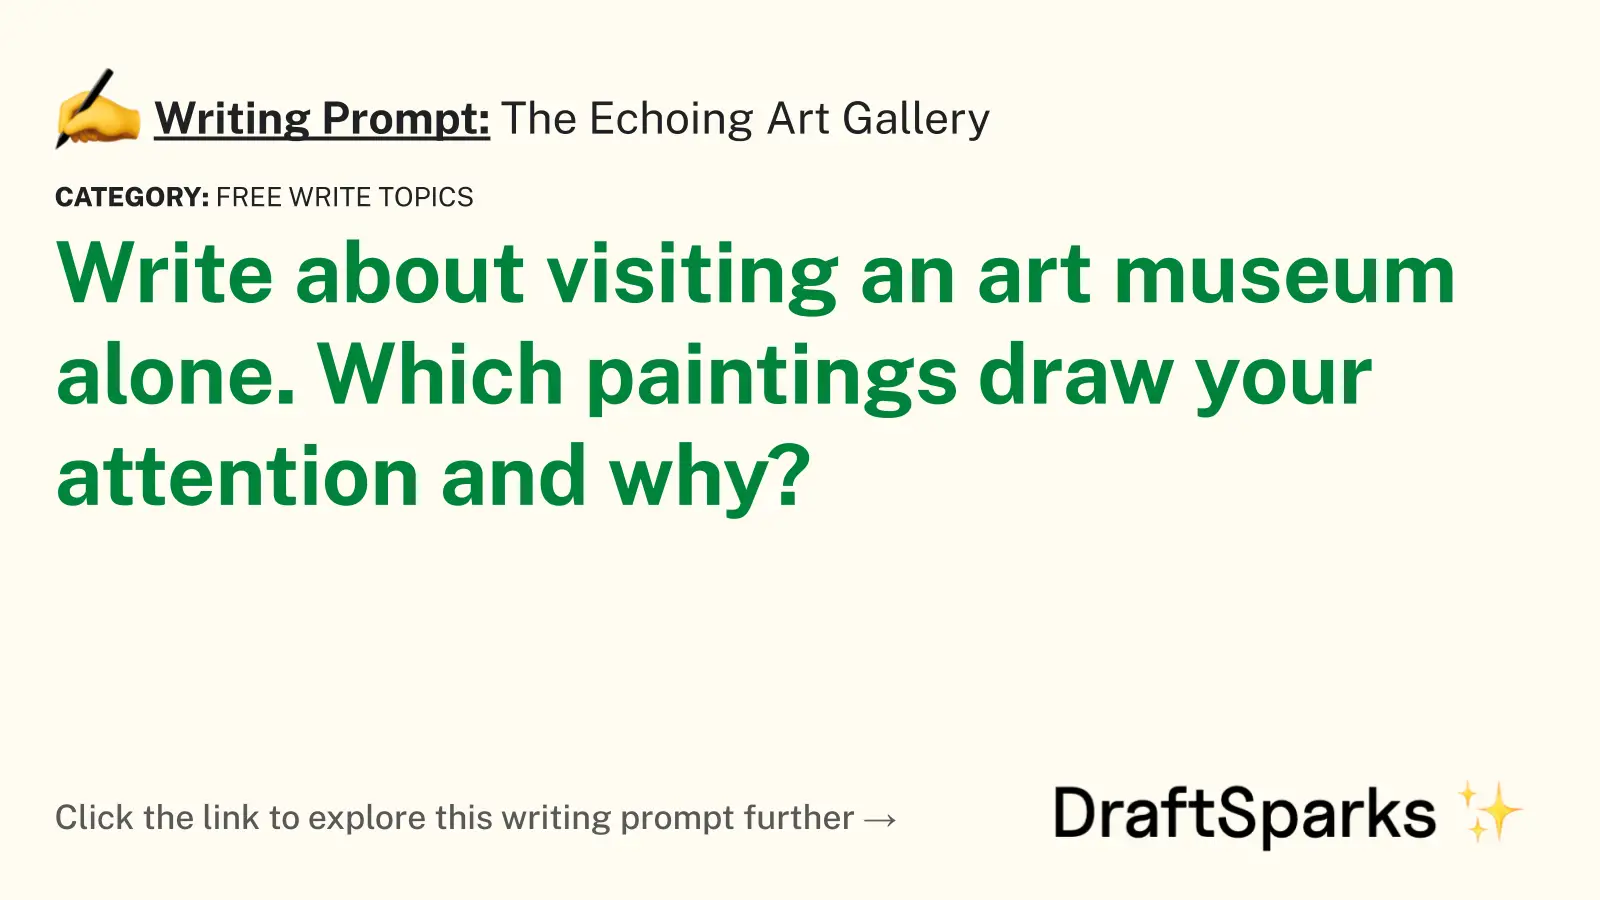 The Echoing Art Gallery